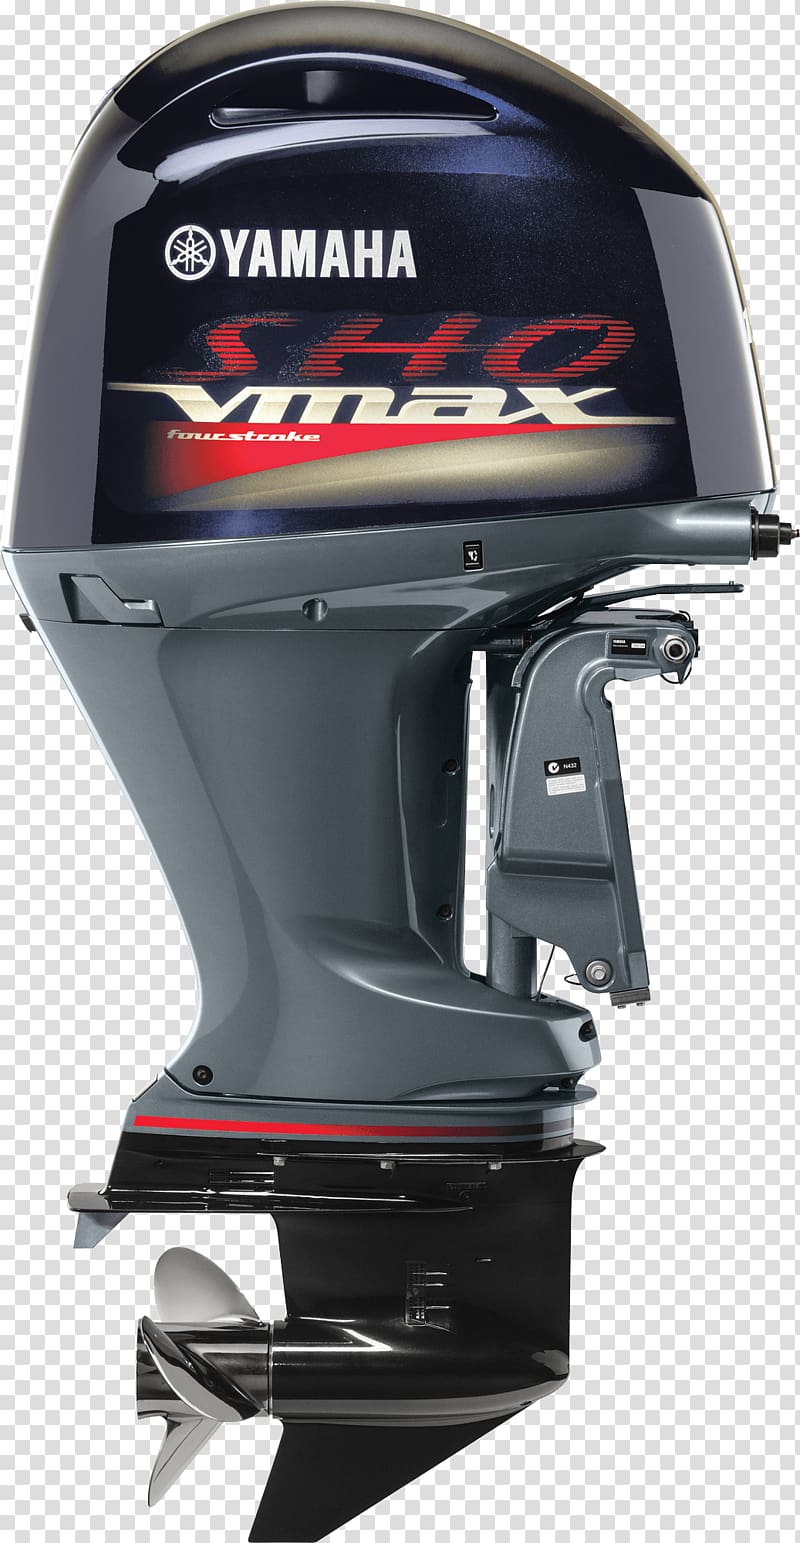 Yamaha Motor Company Ford Taurus SHO Outboard motor Yamaha VMAX Four-stroke engine, car transparent background PNG clipart